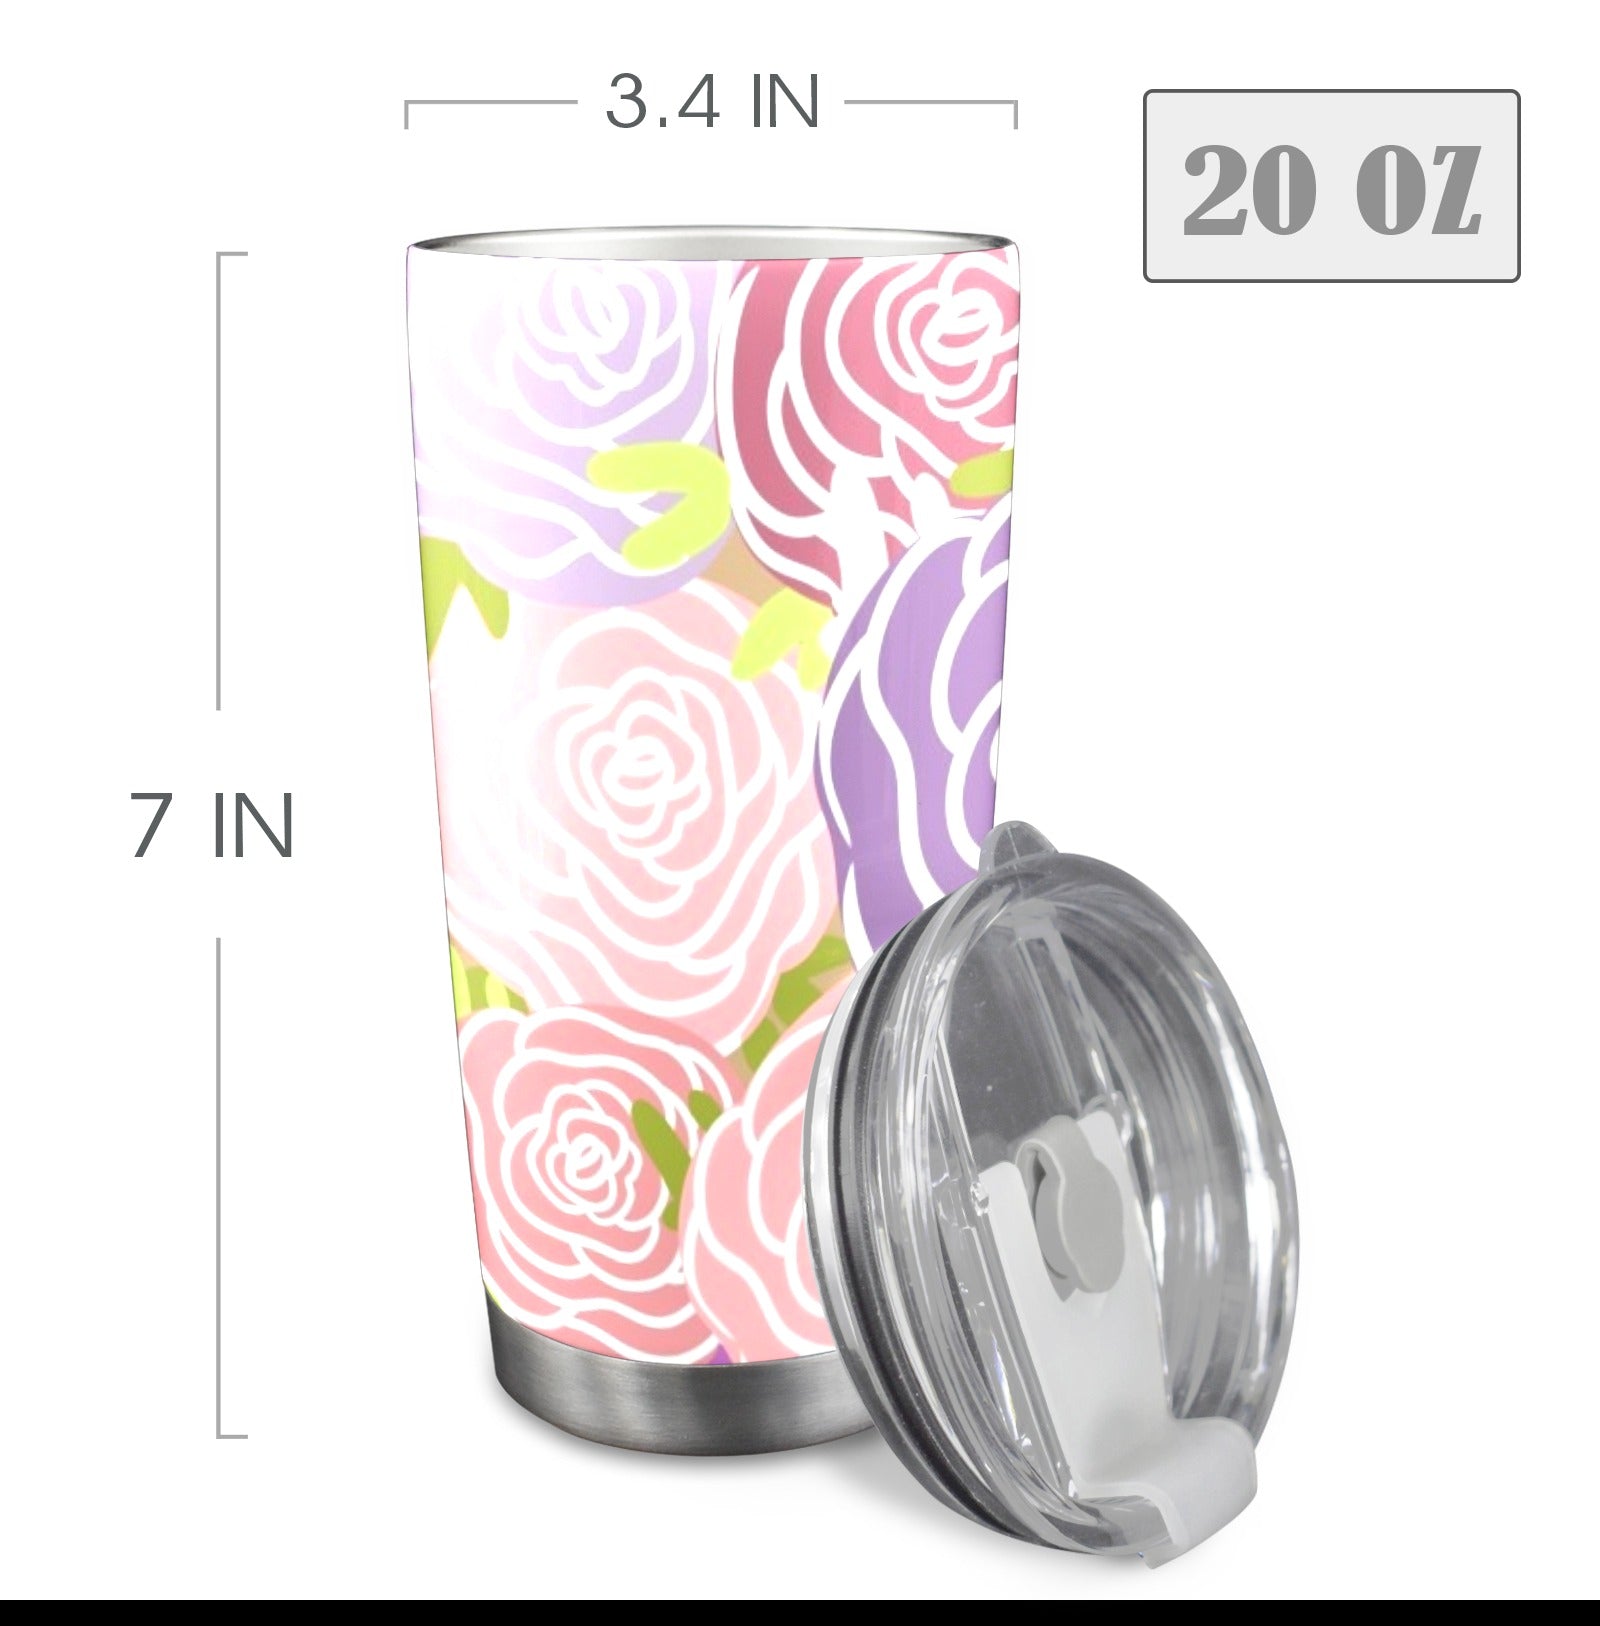 Abstract Roses - 20oz Travel Mug with Clear Lid Clear Lid Travel Mug Plants